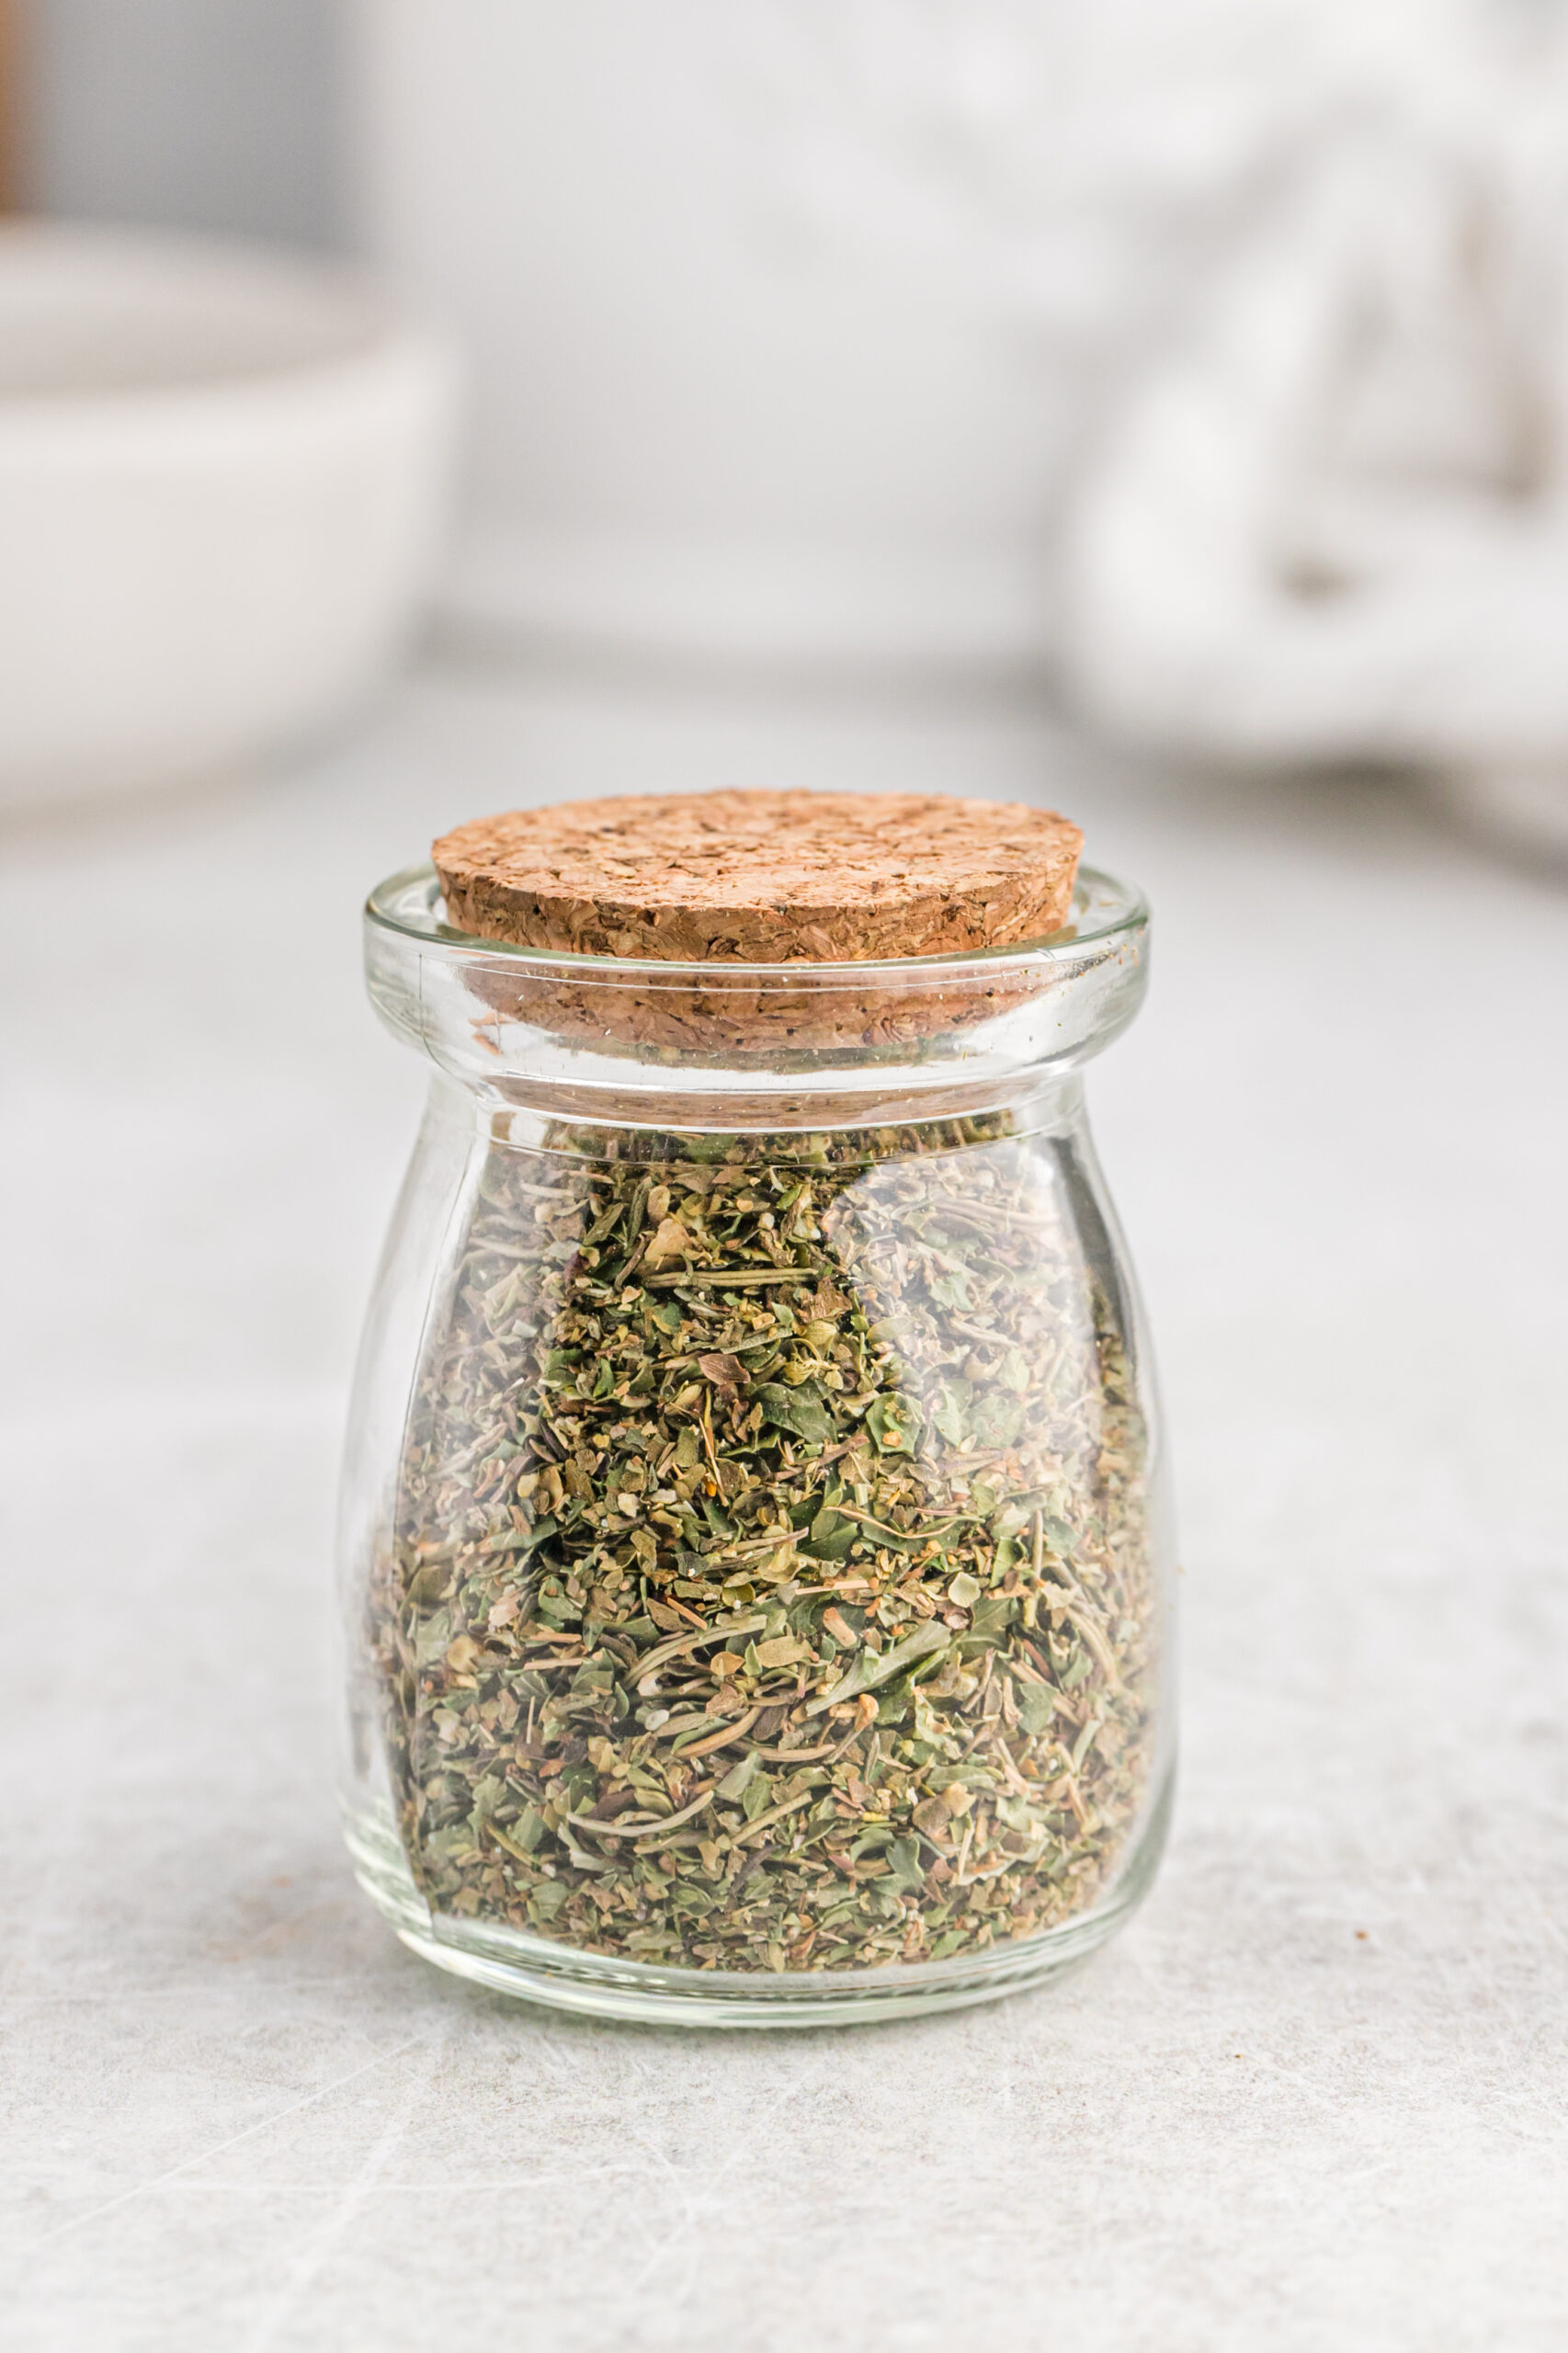 Italian seasoning in a glass canister with a tight cork lid